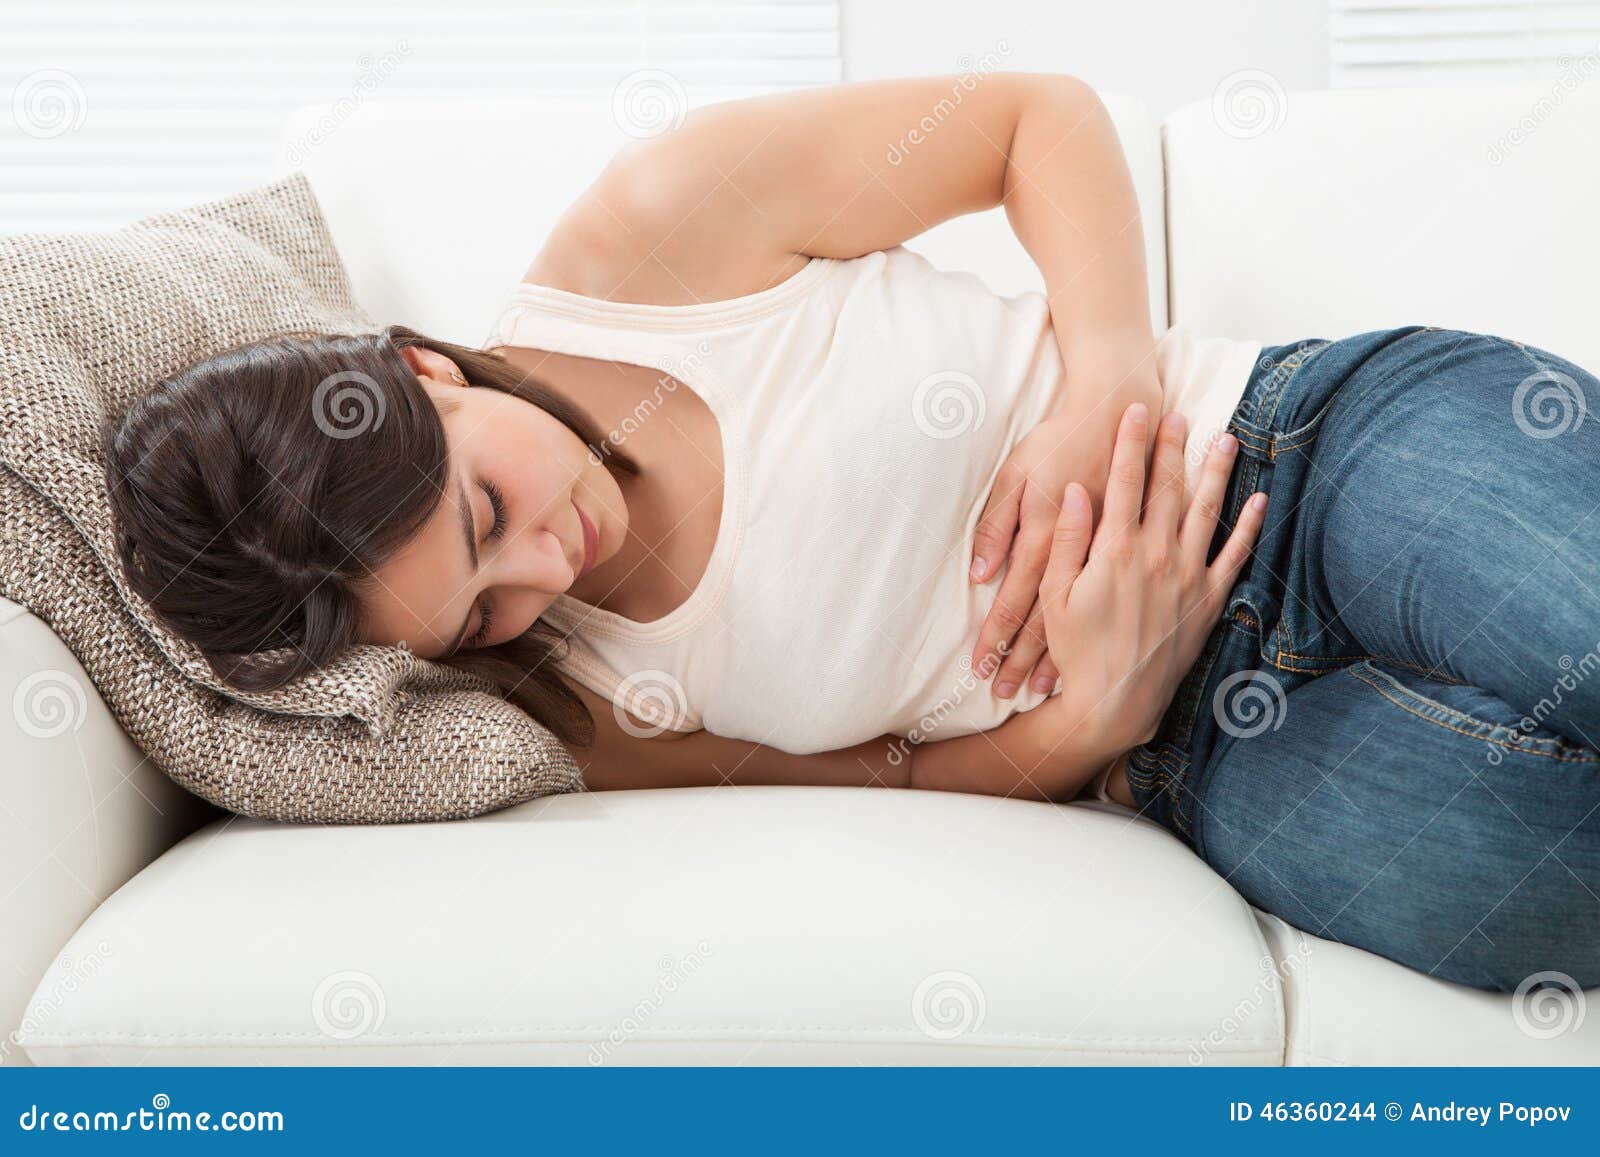 woman suffering from stomachache on sofa